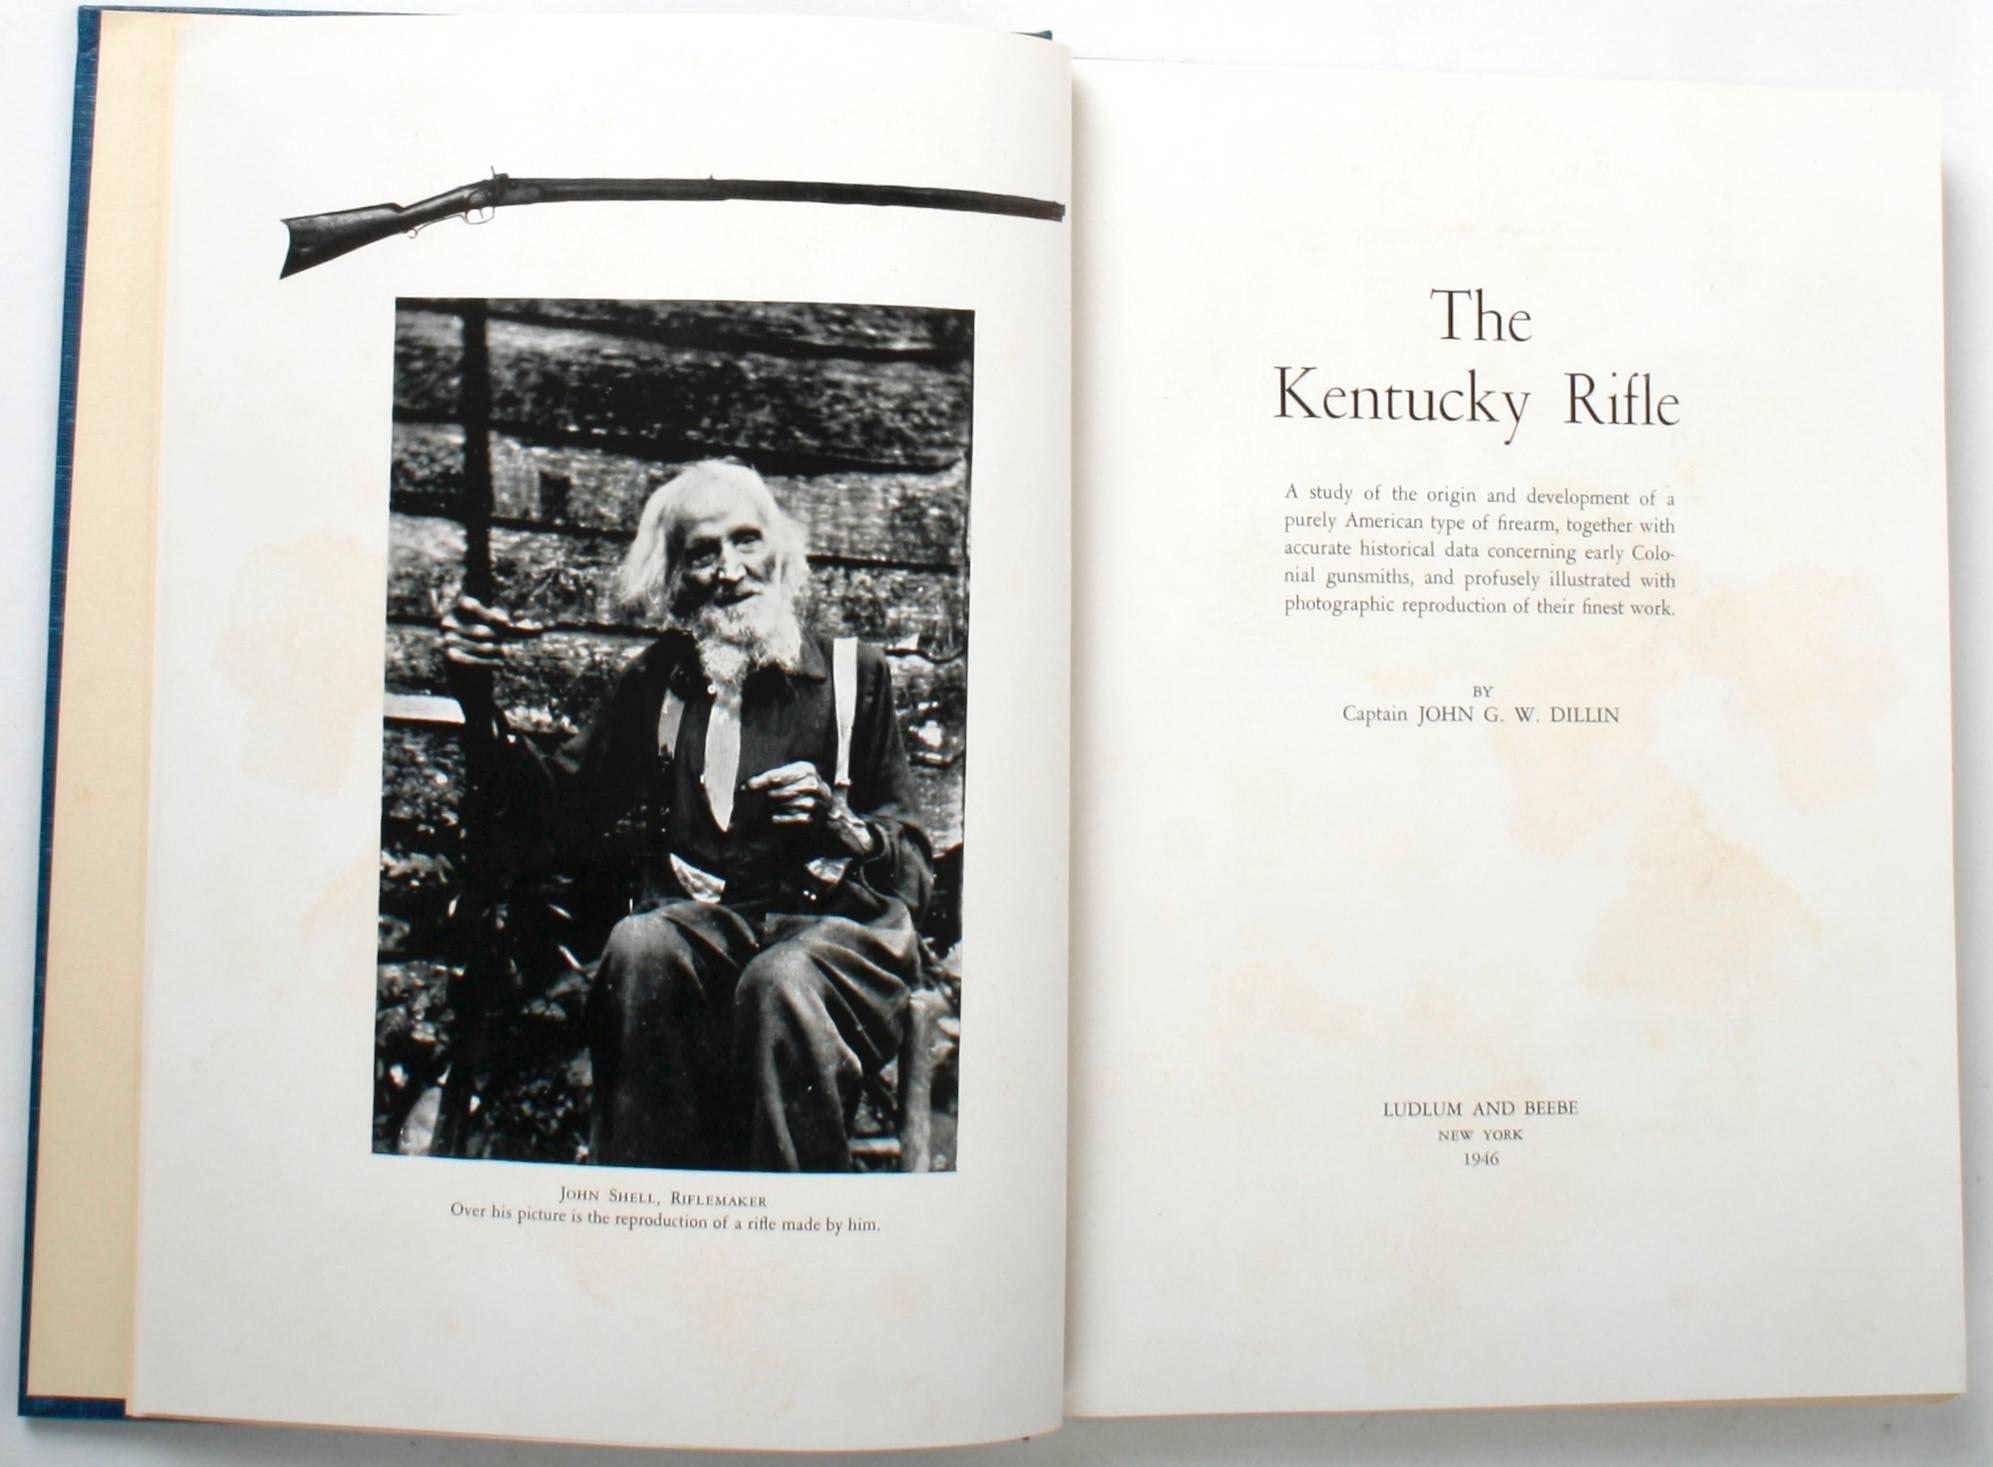 The Kentucky Rifle by Captain G. W. Dillin. New York: Ludlum and Beebe, 1946. Stated third edition hardcover with original slip case. 136 pp.  In 1924 Captain John G. W. Dillin wrote the first edition of this  book, The Kentucky Rifle, hoping it